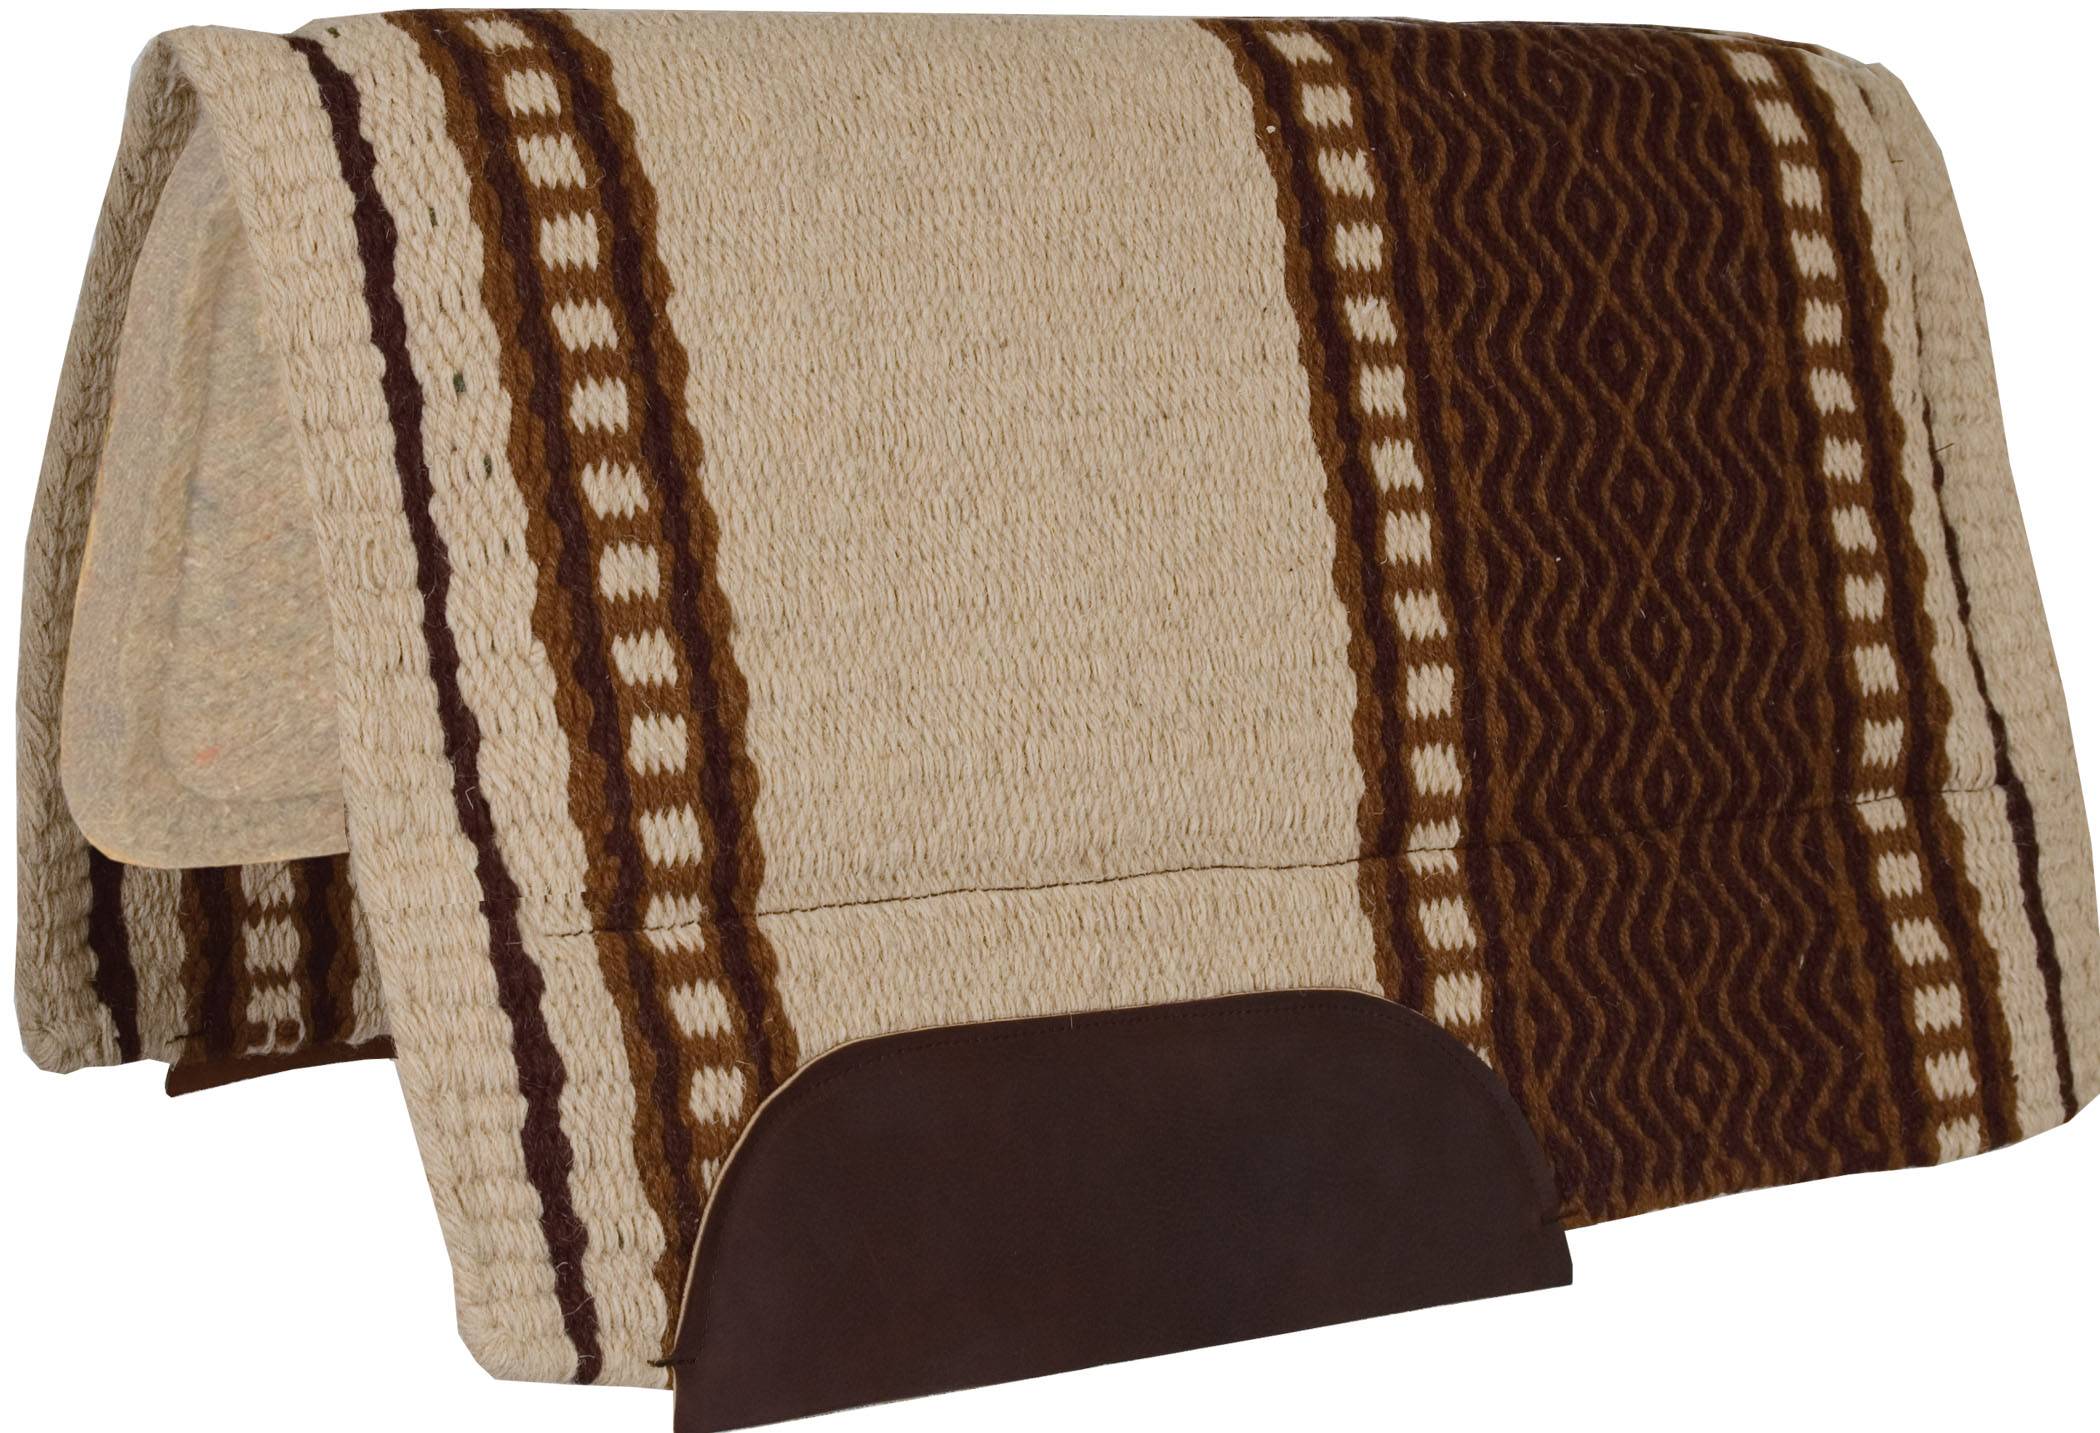 Mustang New Zealand Wool Pad with Tan Wool Bottom